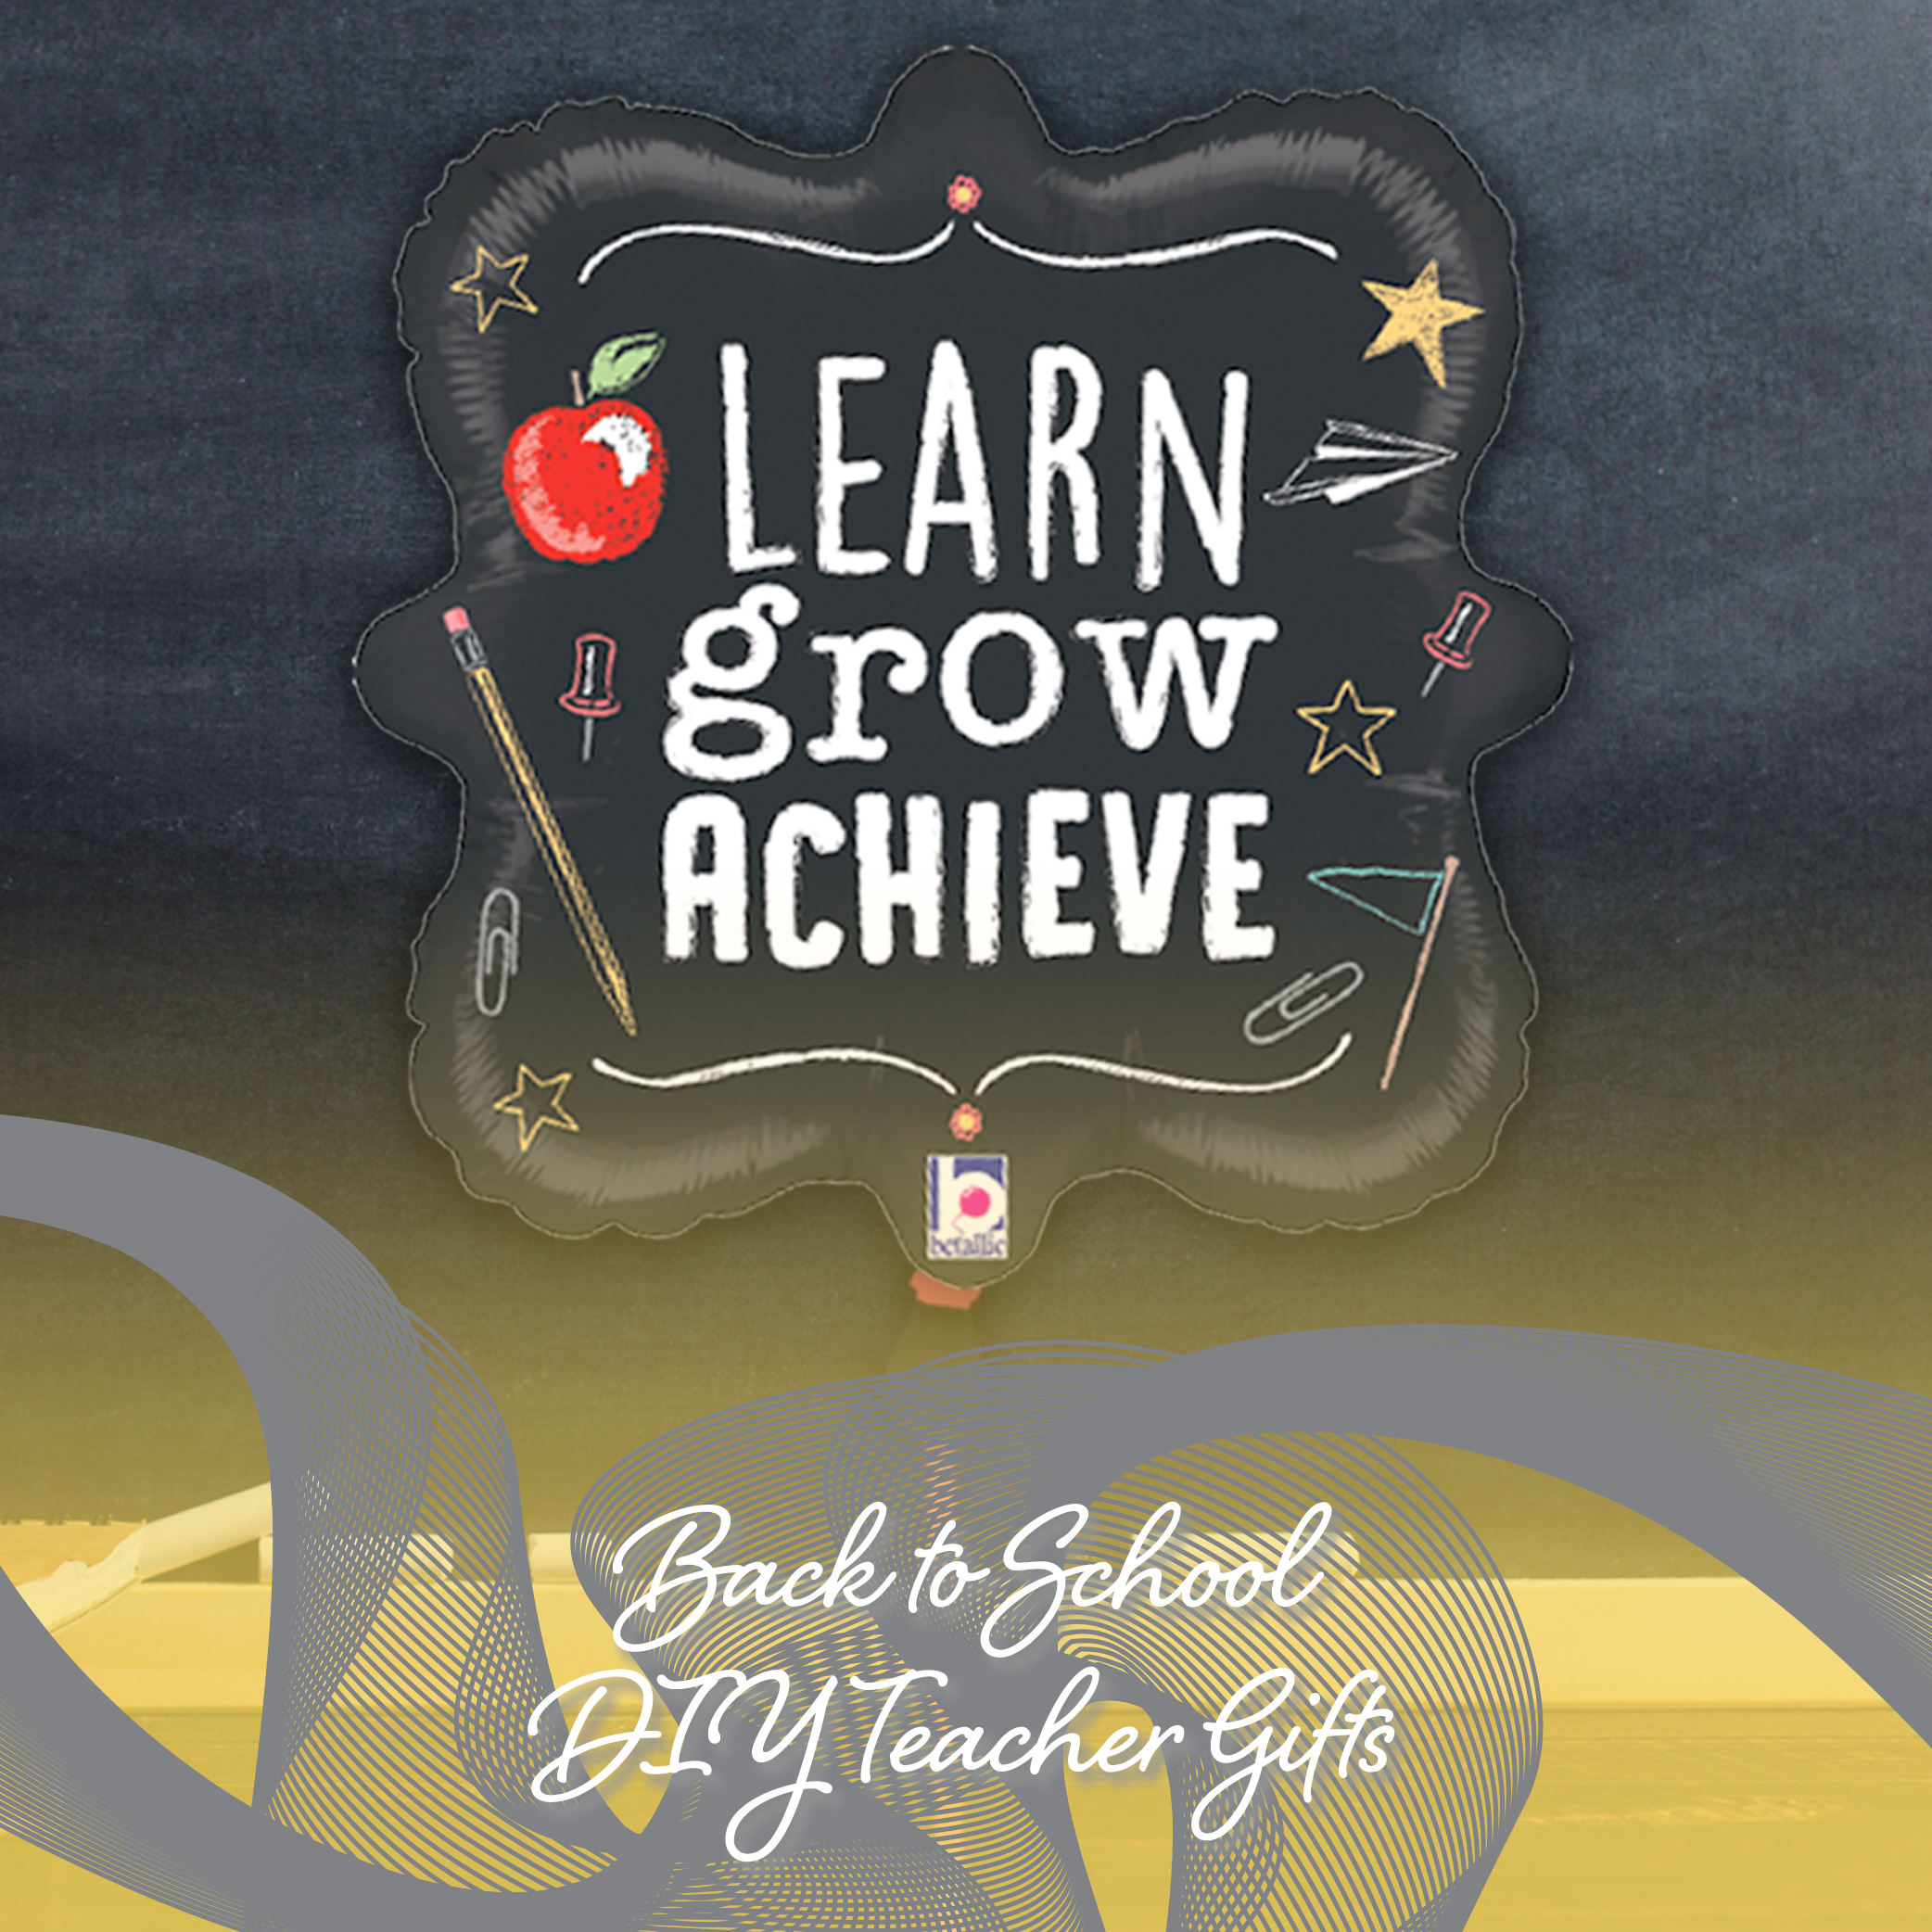 a sign that says learn grow achieve on it